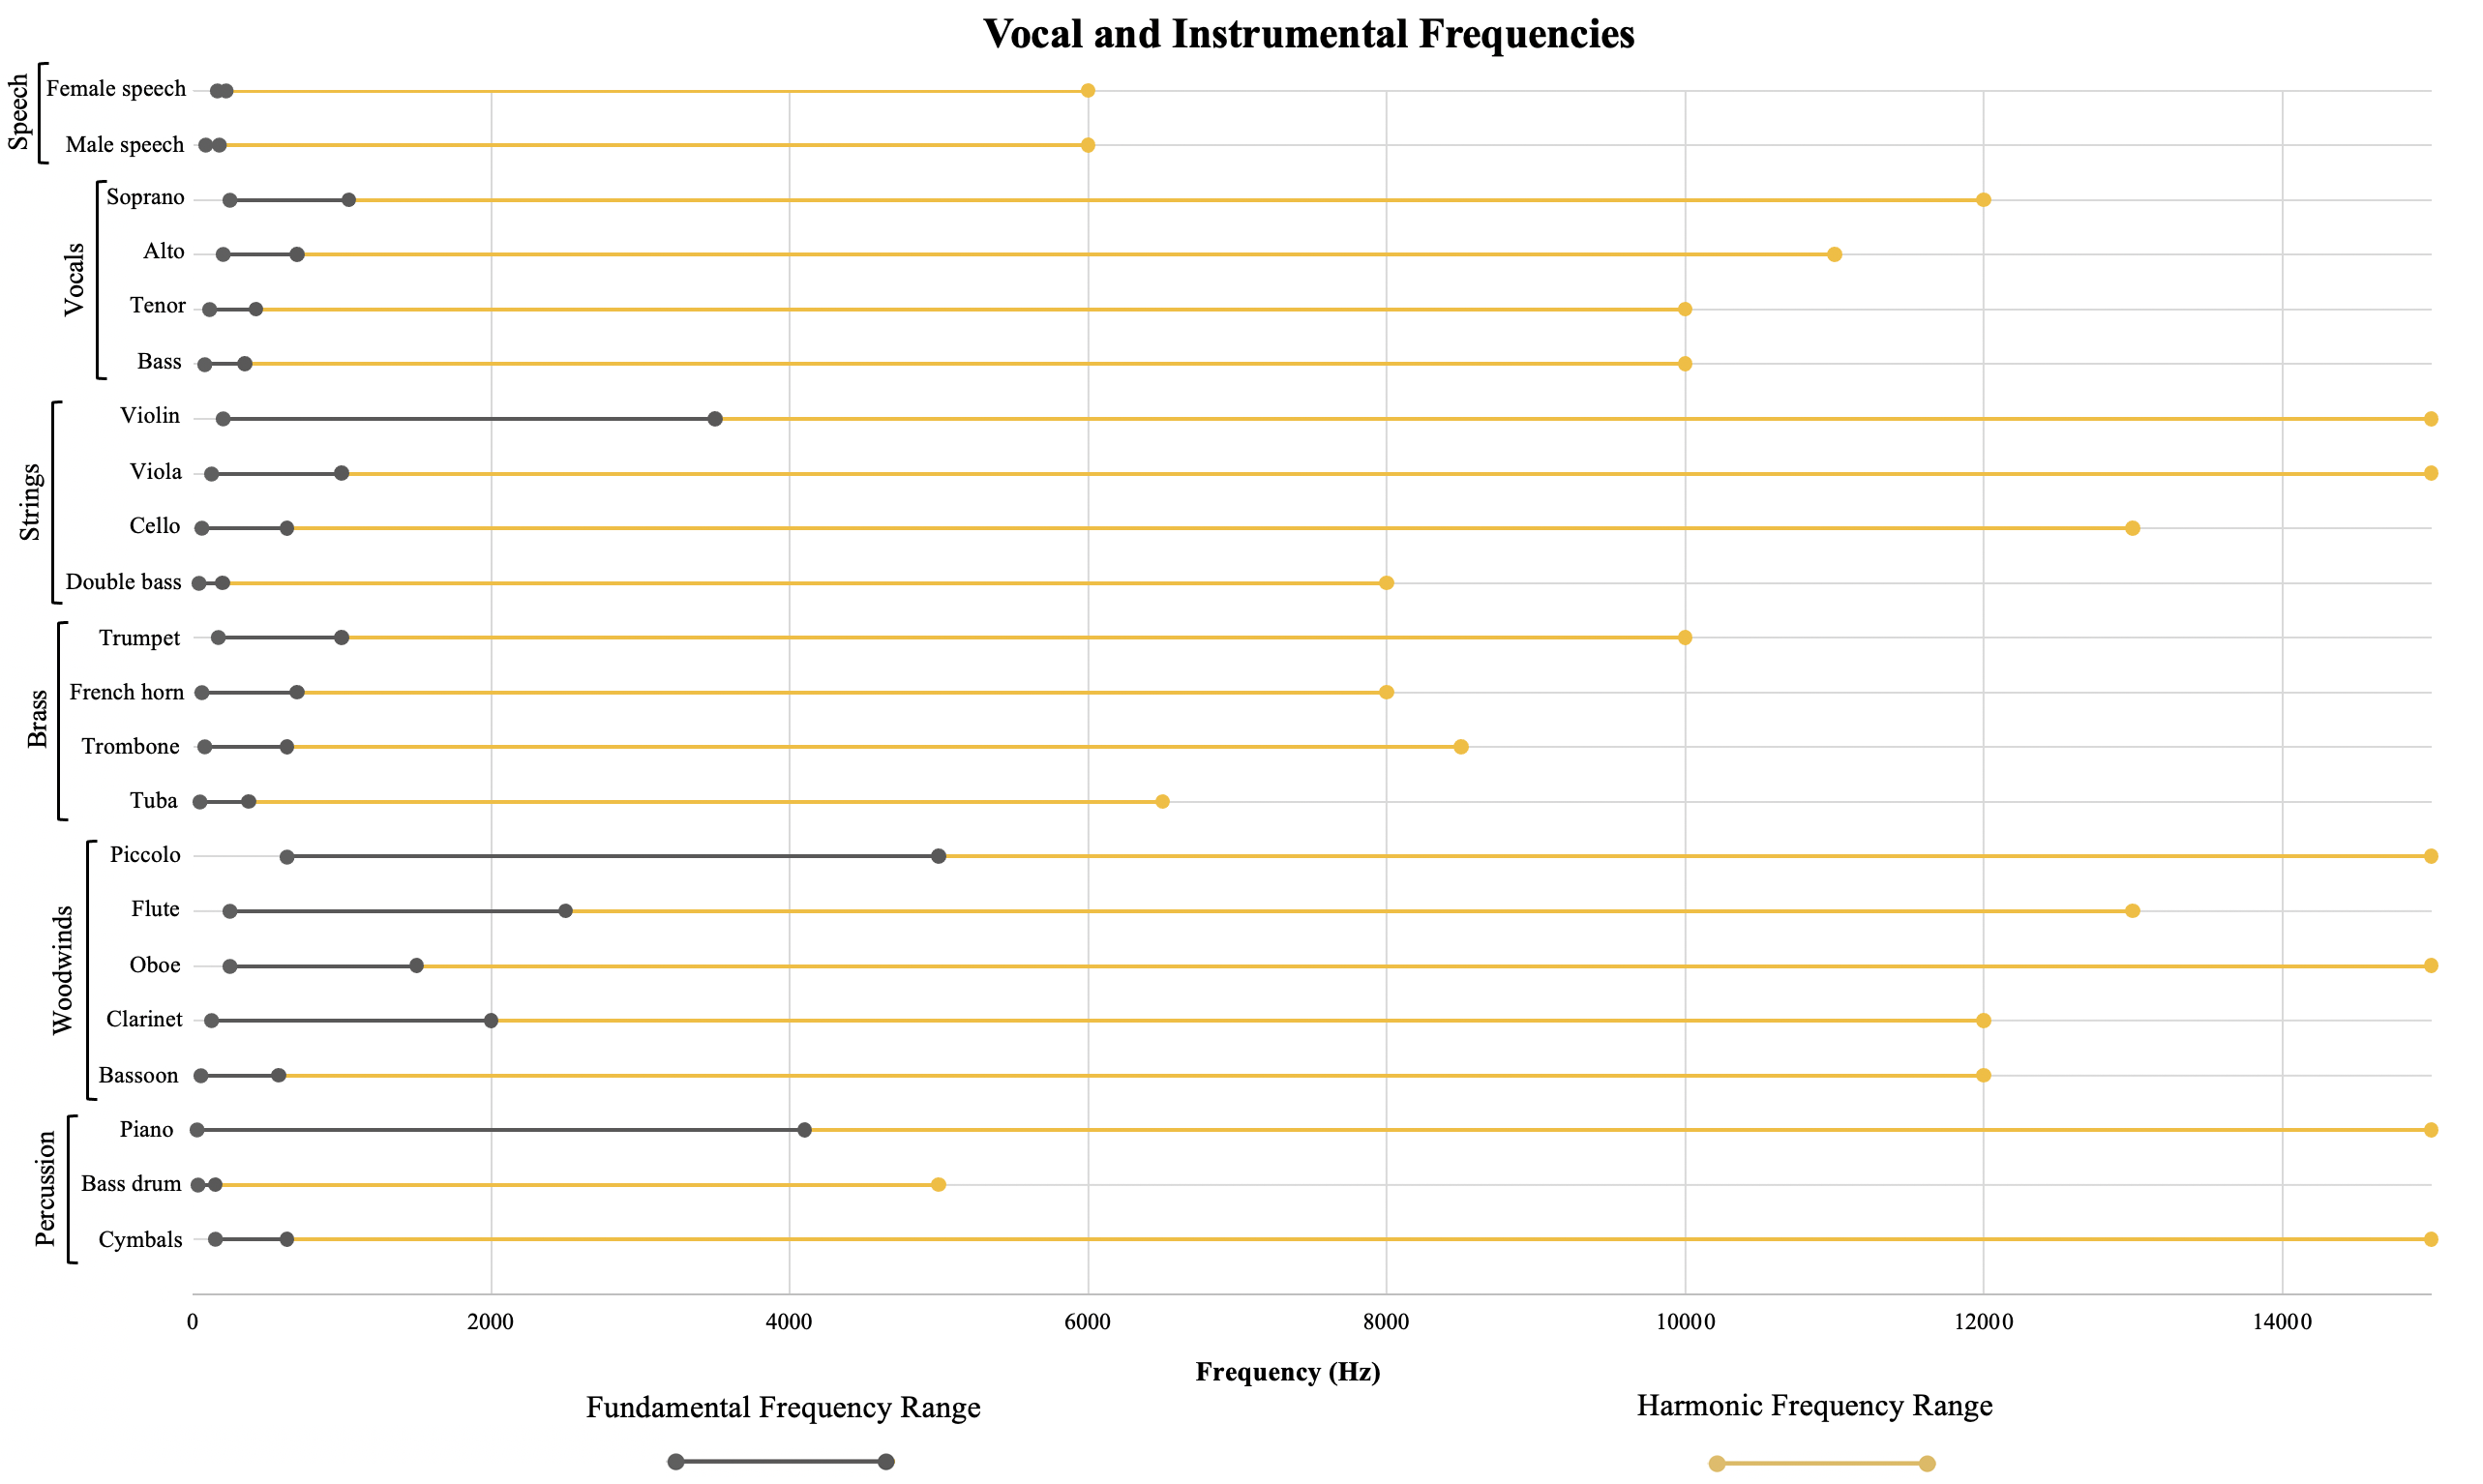 Speech and Musical Instrument Frequencies